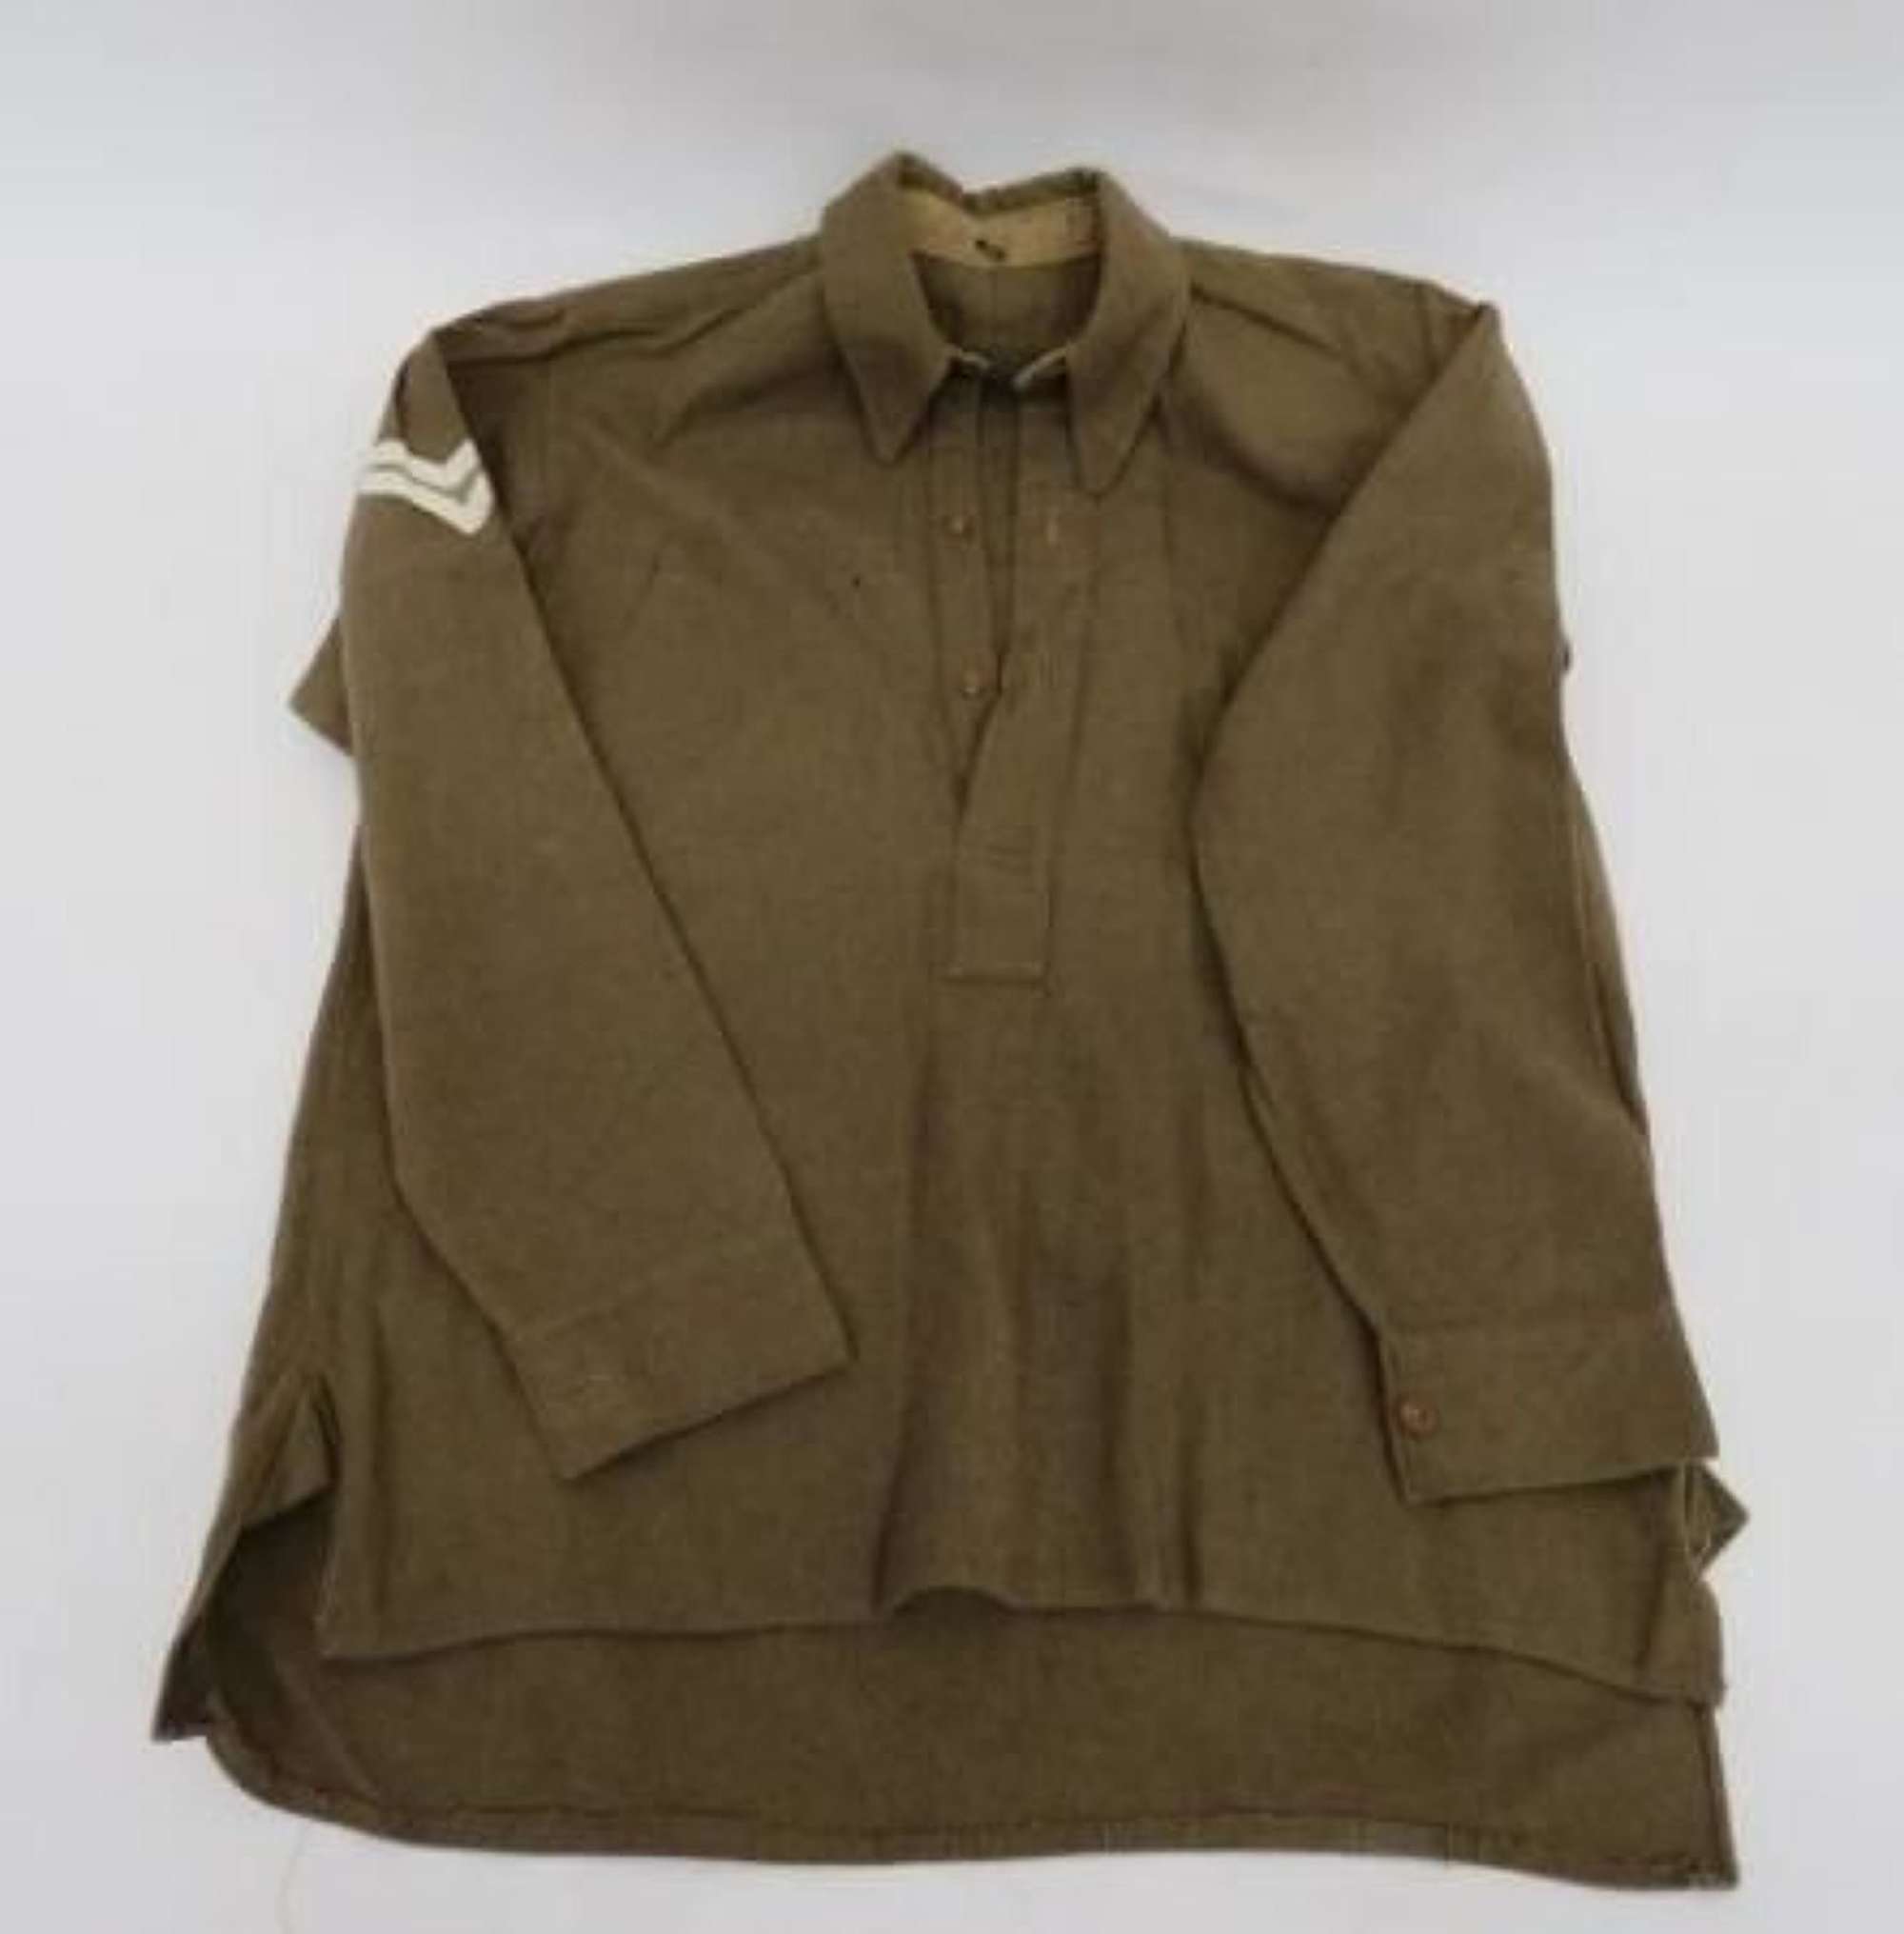 WW 2 Issue Army Other Ranks Half Front Collared Shirt